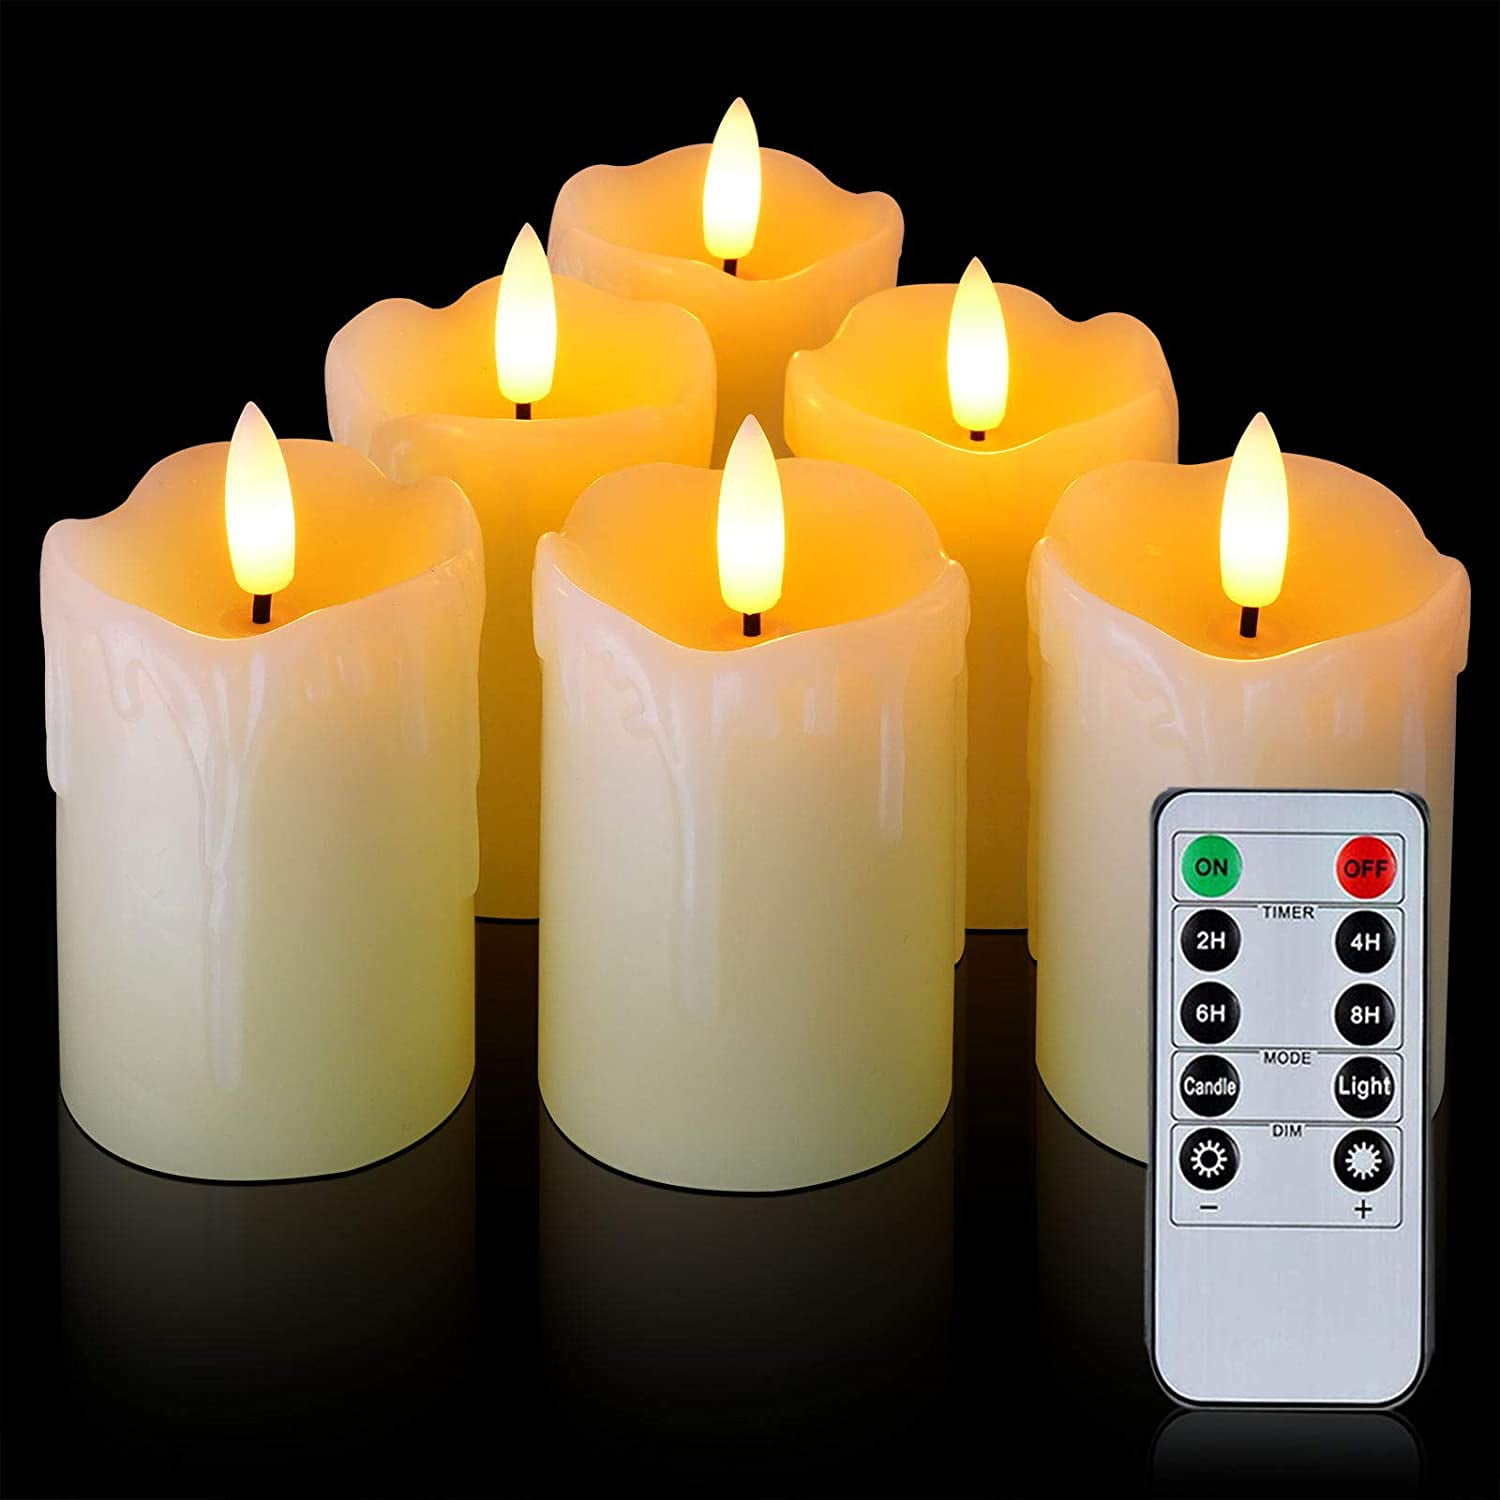 2x Luminara Flickering Moving Wick Flameless Led Taper Candle with Remote 3 Type 